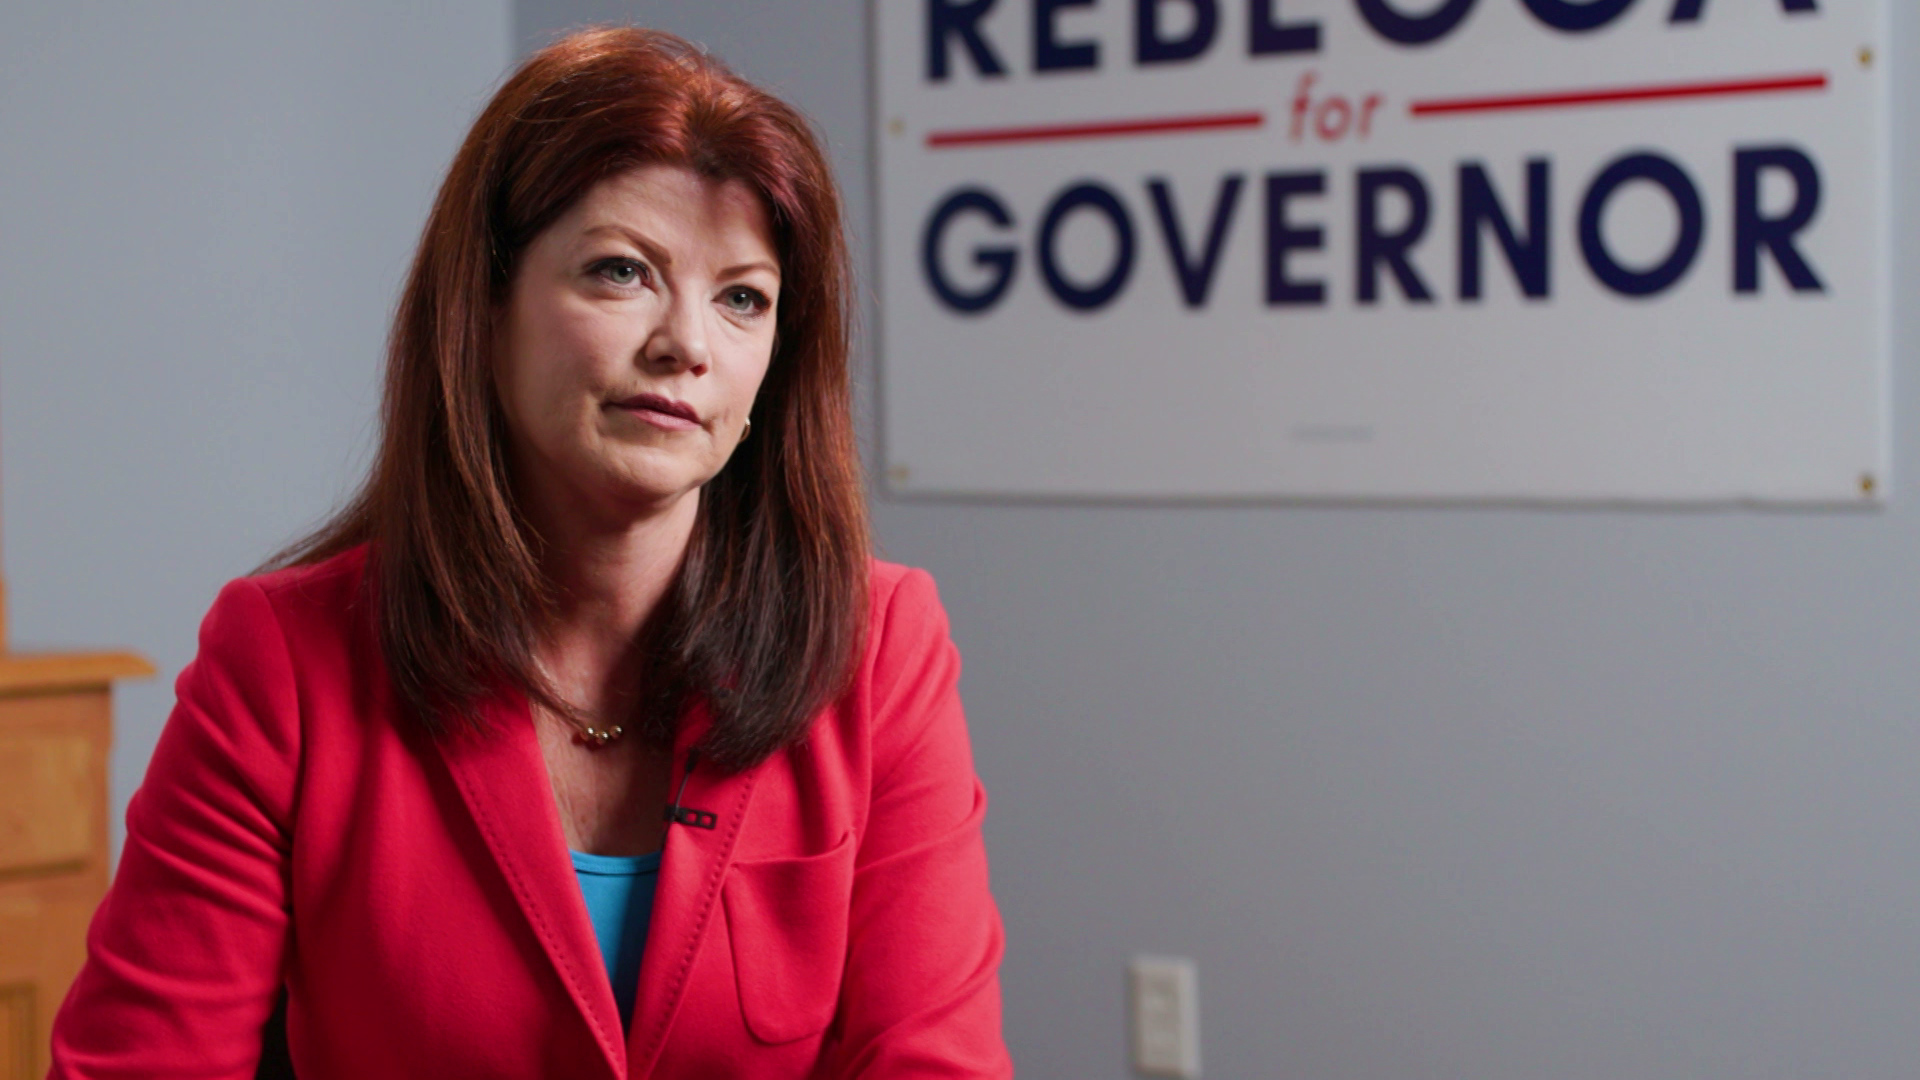 Rebecca Kleefisch is seated in a room with a sign reading "Rebecca for Governor" in the background.